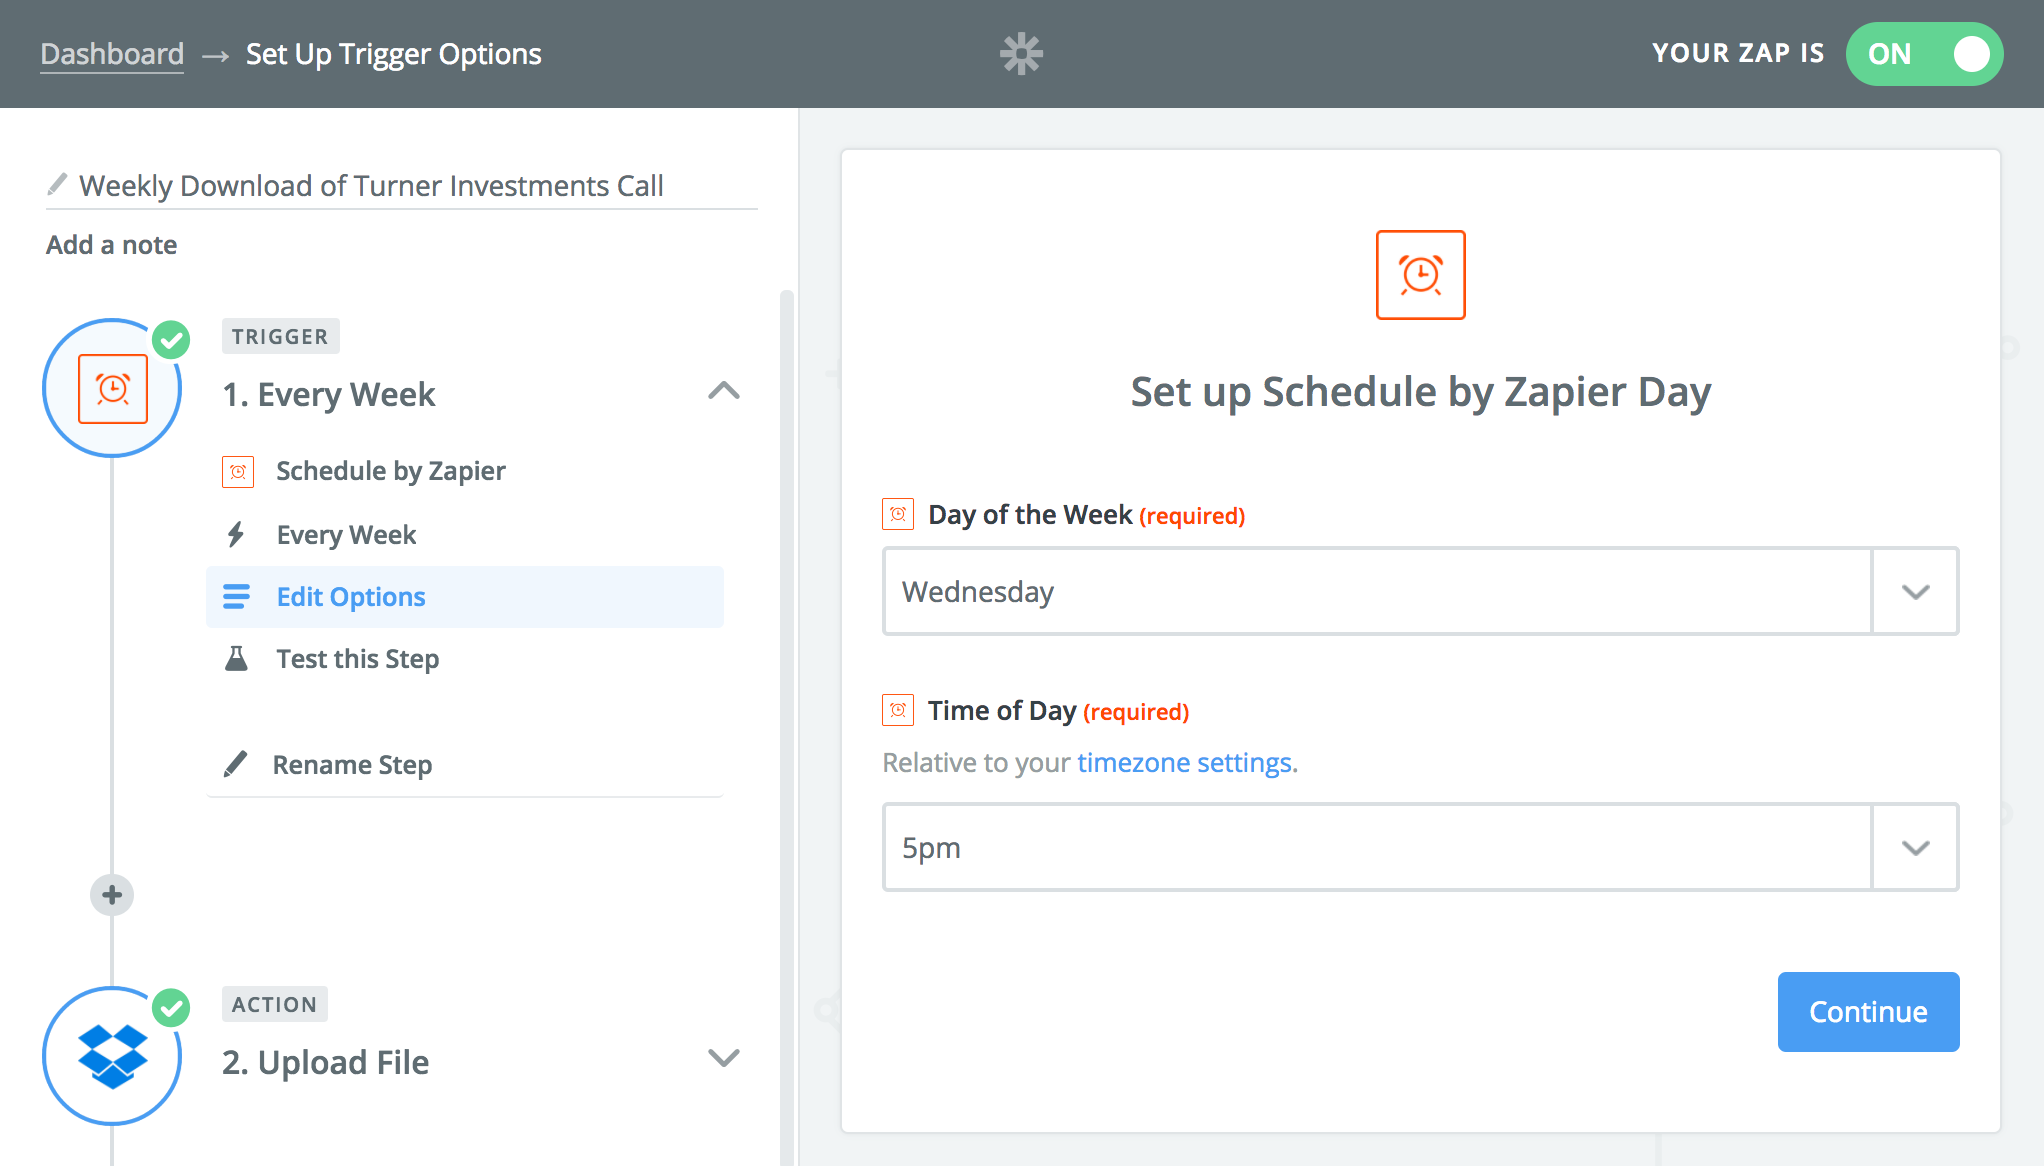 Zapier trigger options: Every Week, Day of Week is Wednesday, Time of Day is 5pm.